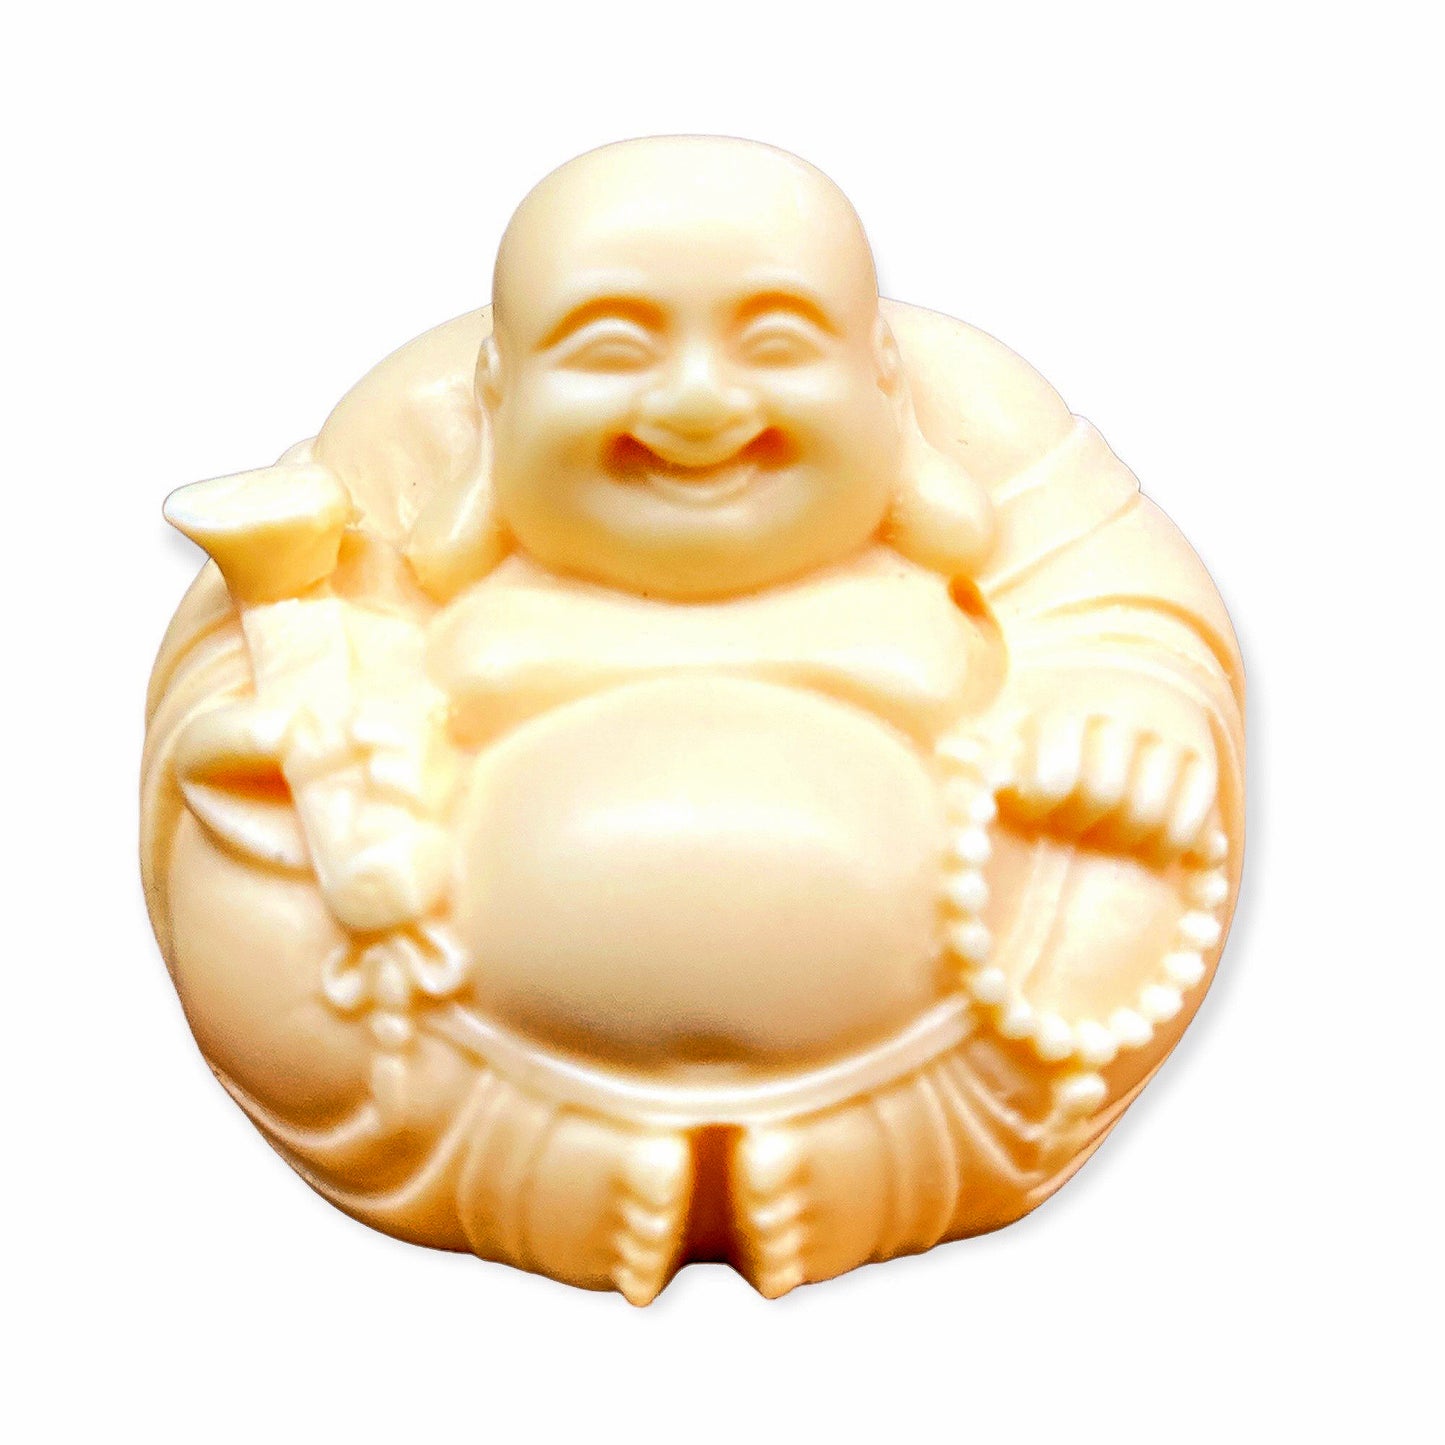 Sitting Fat Buddha Carved of Ivory Nut - 2 inch - 5cm - China - NEW1022